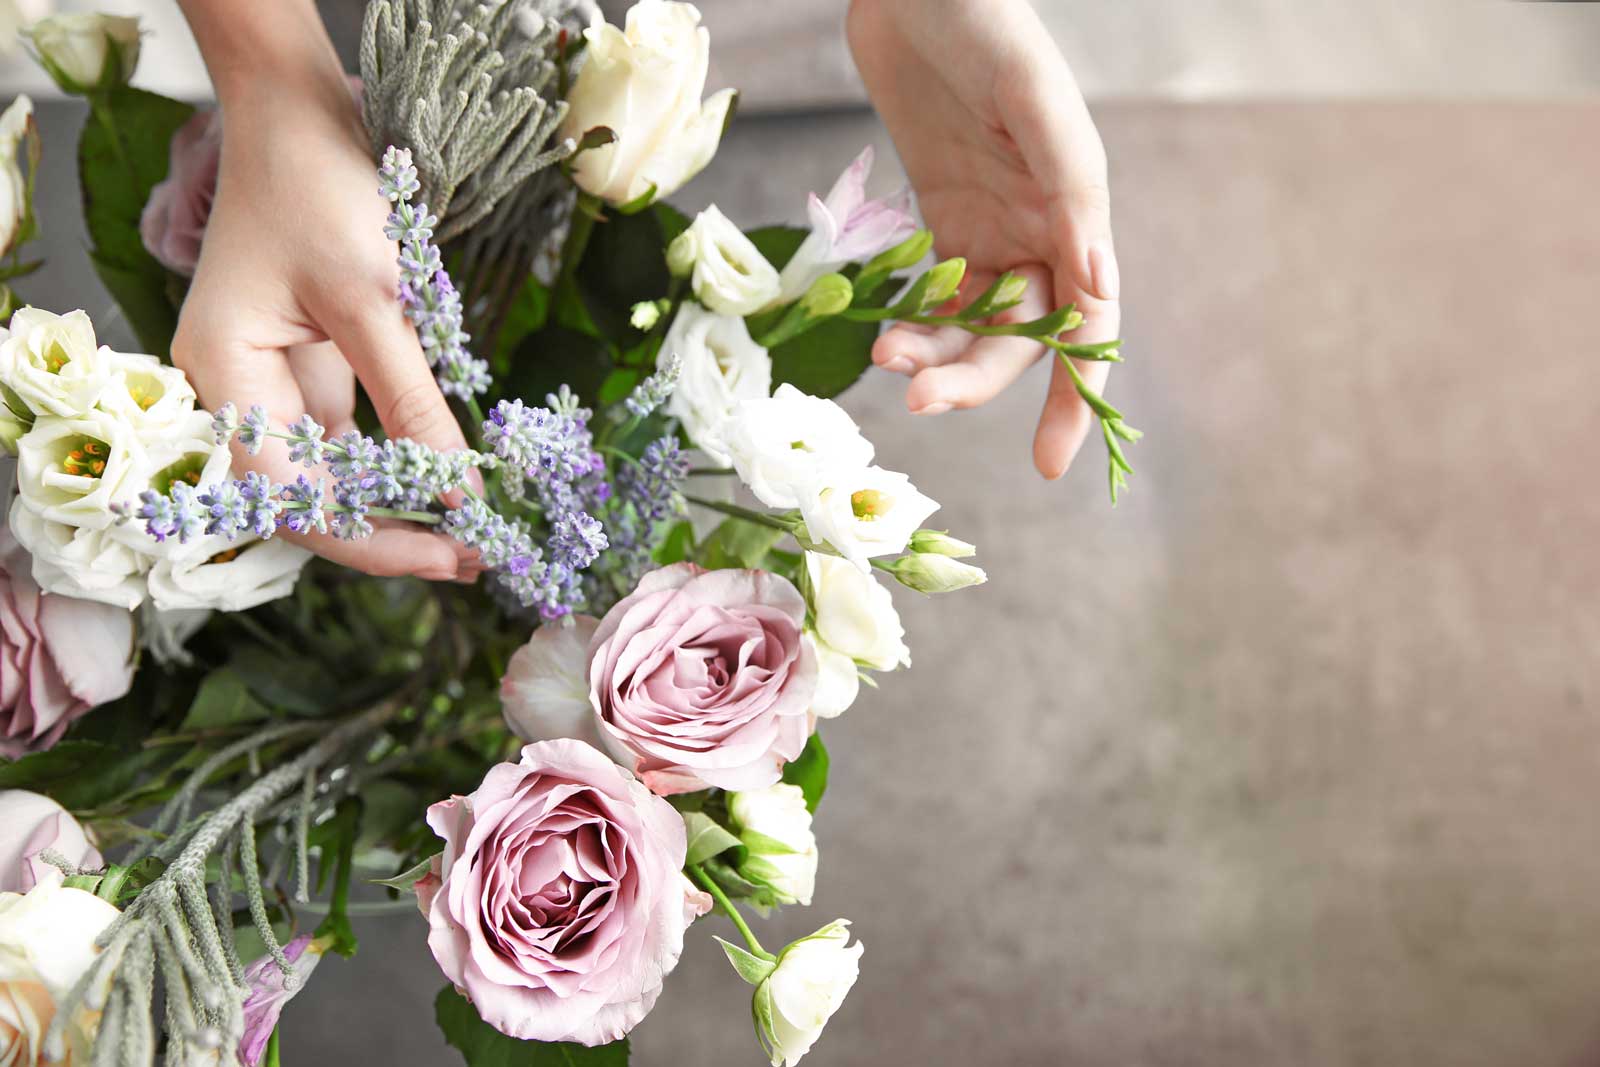 Lush Florist & Gifts Moves To New Mobile Location